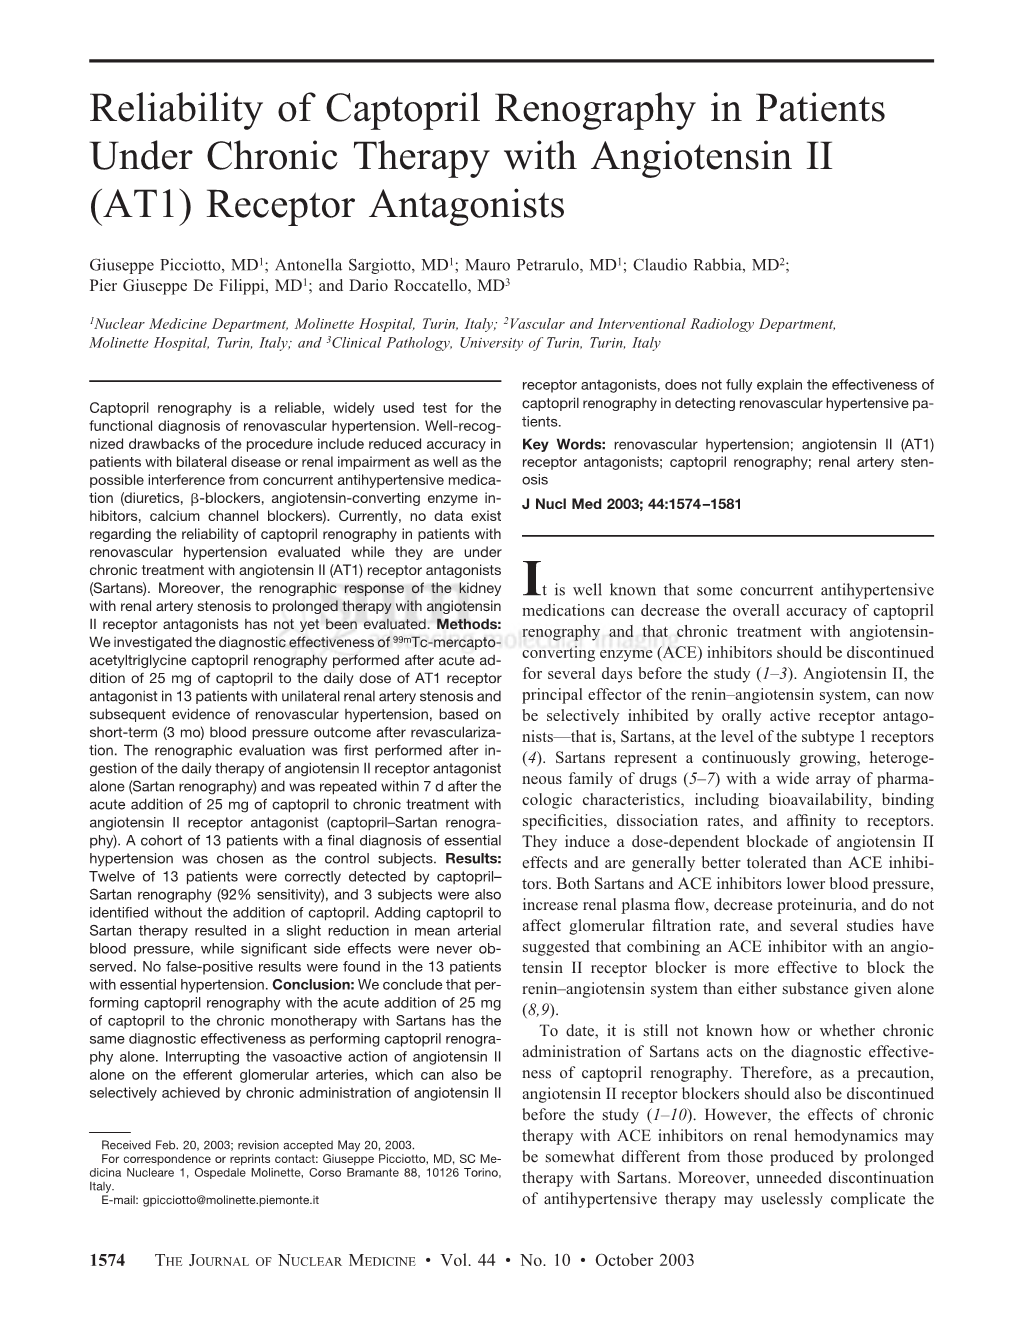 Reliability of Captopril Renography in Patients Under Chronic Therapy with Angiotensin II (AT1) Receptor Antagonists